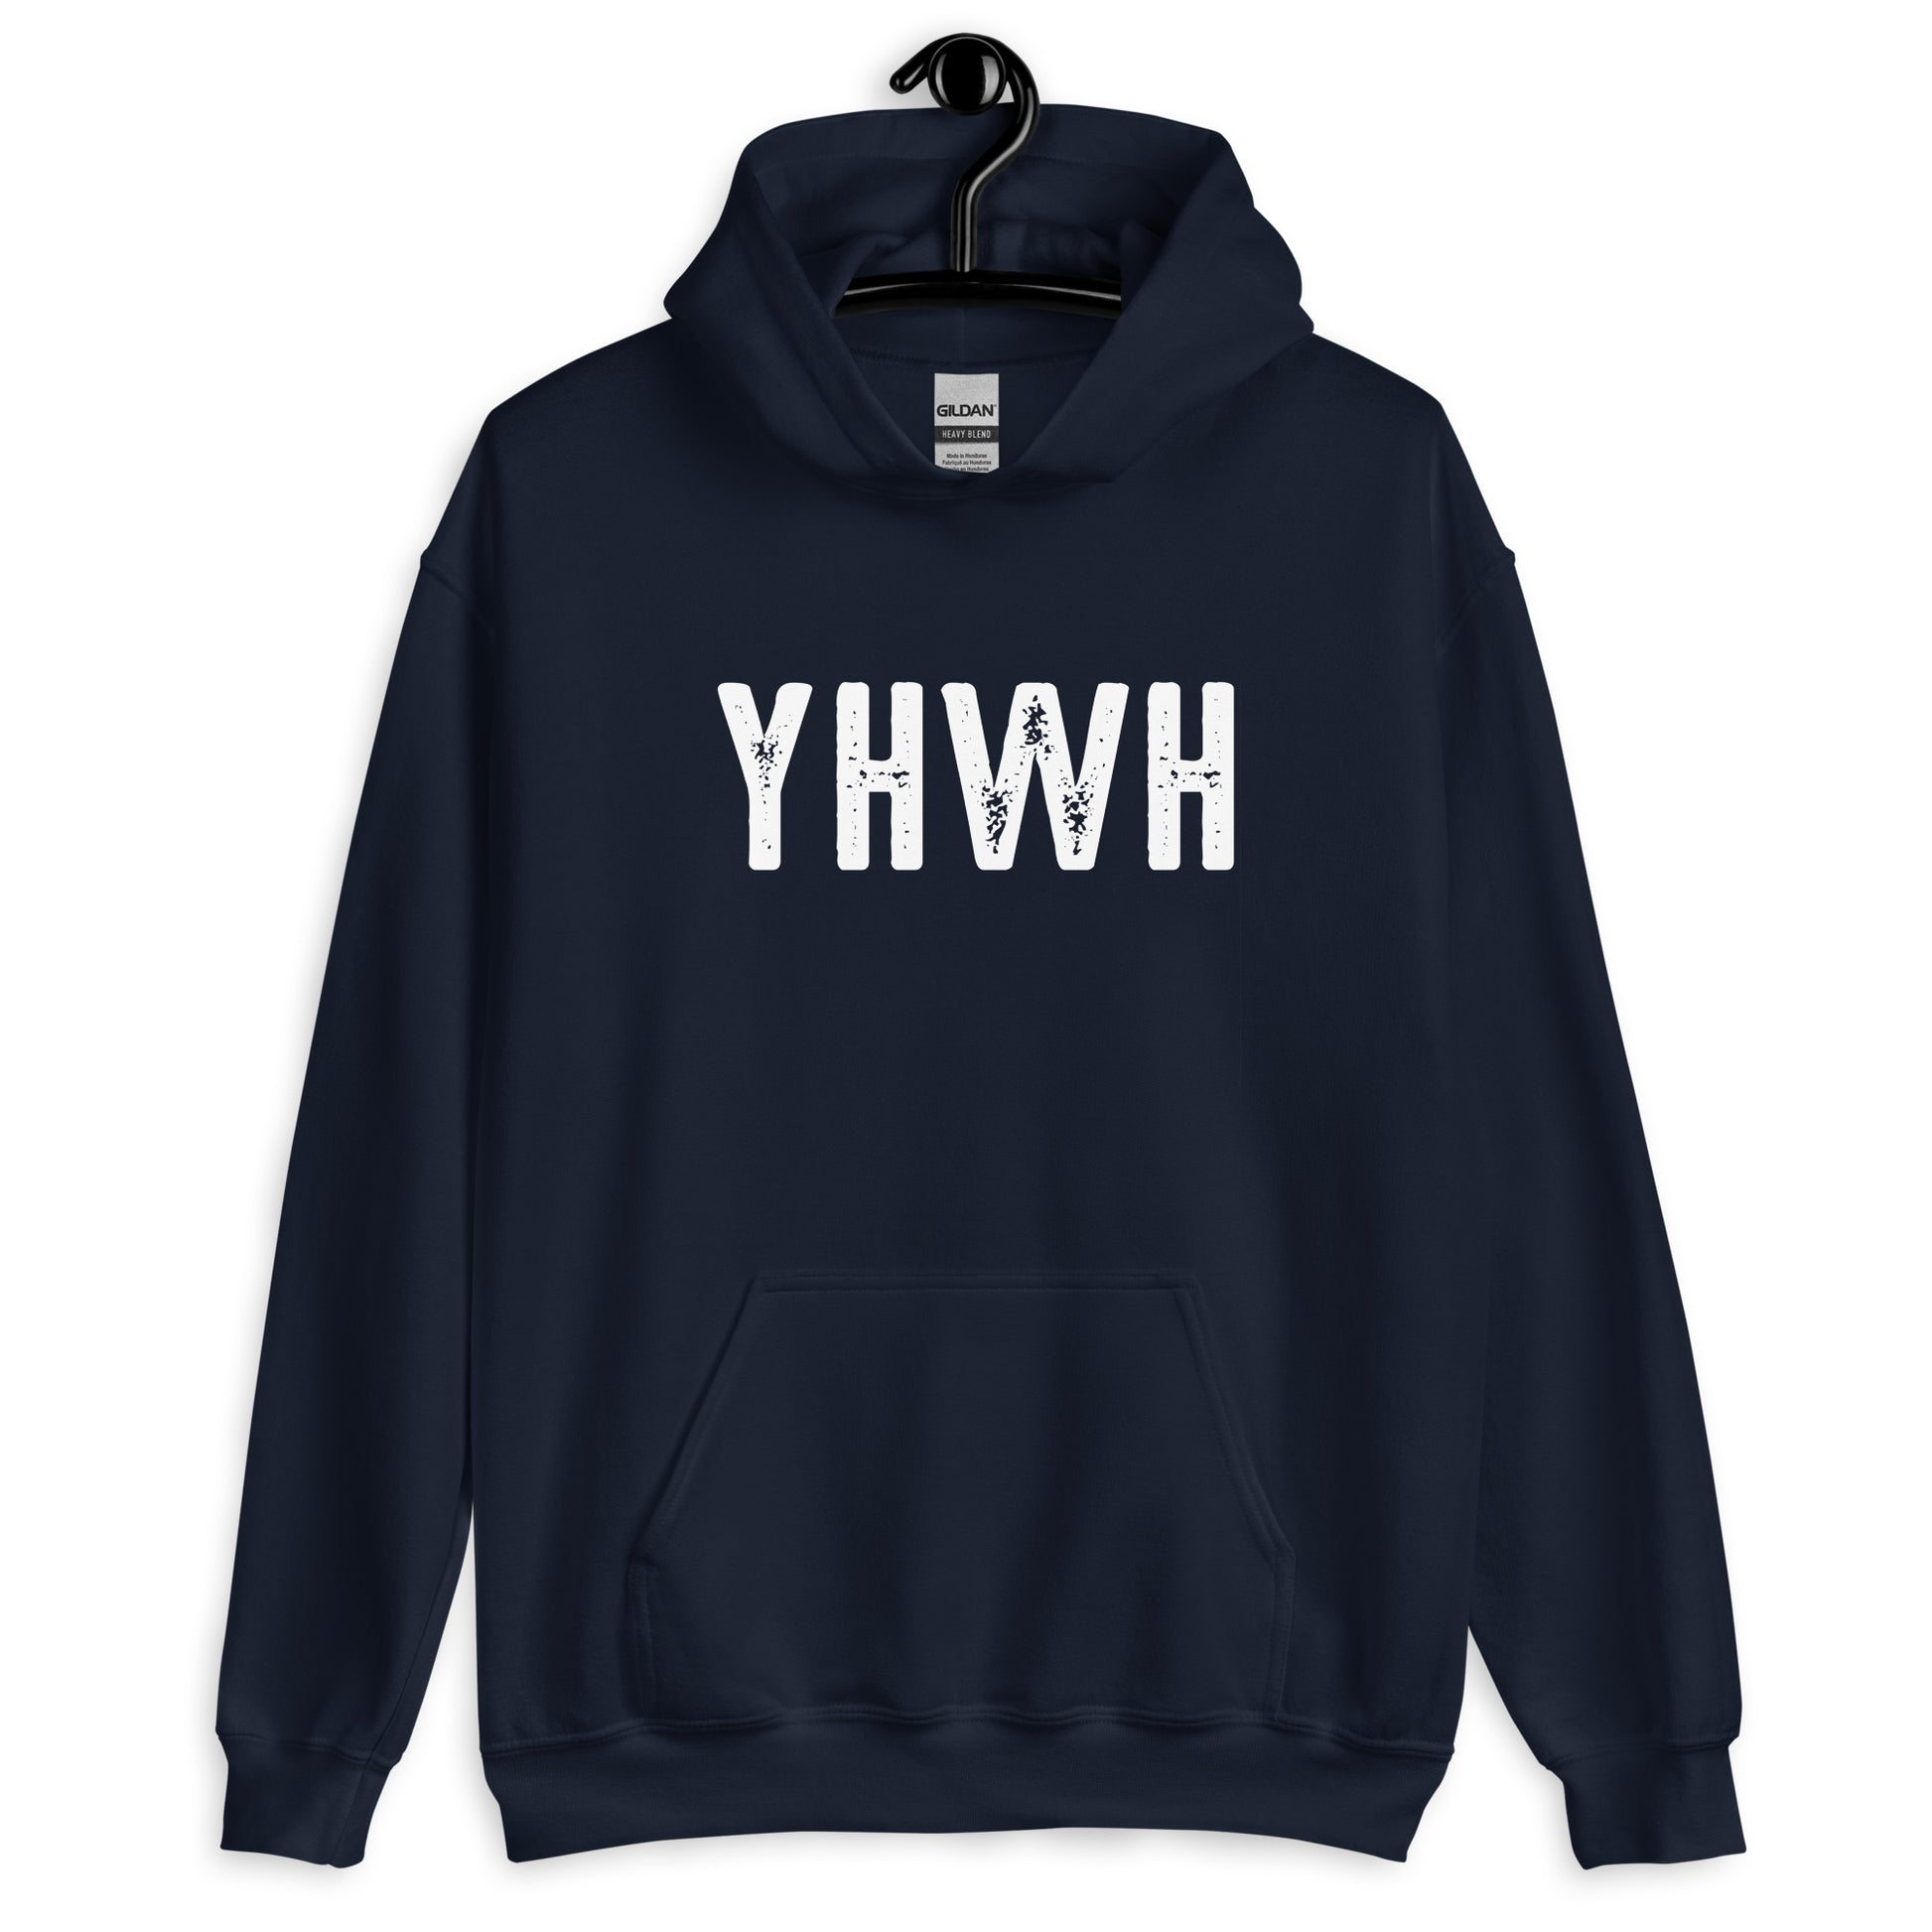 YHWH Hebrew Biblical Name of God Yahweh Christian aesthetic distressed design printed in white on cozy navy blue unisex hoodie sweatshirt for men and women